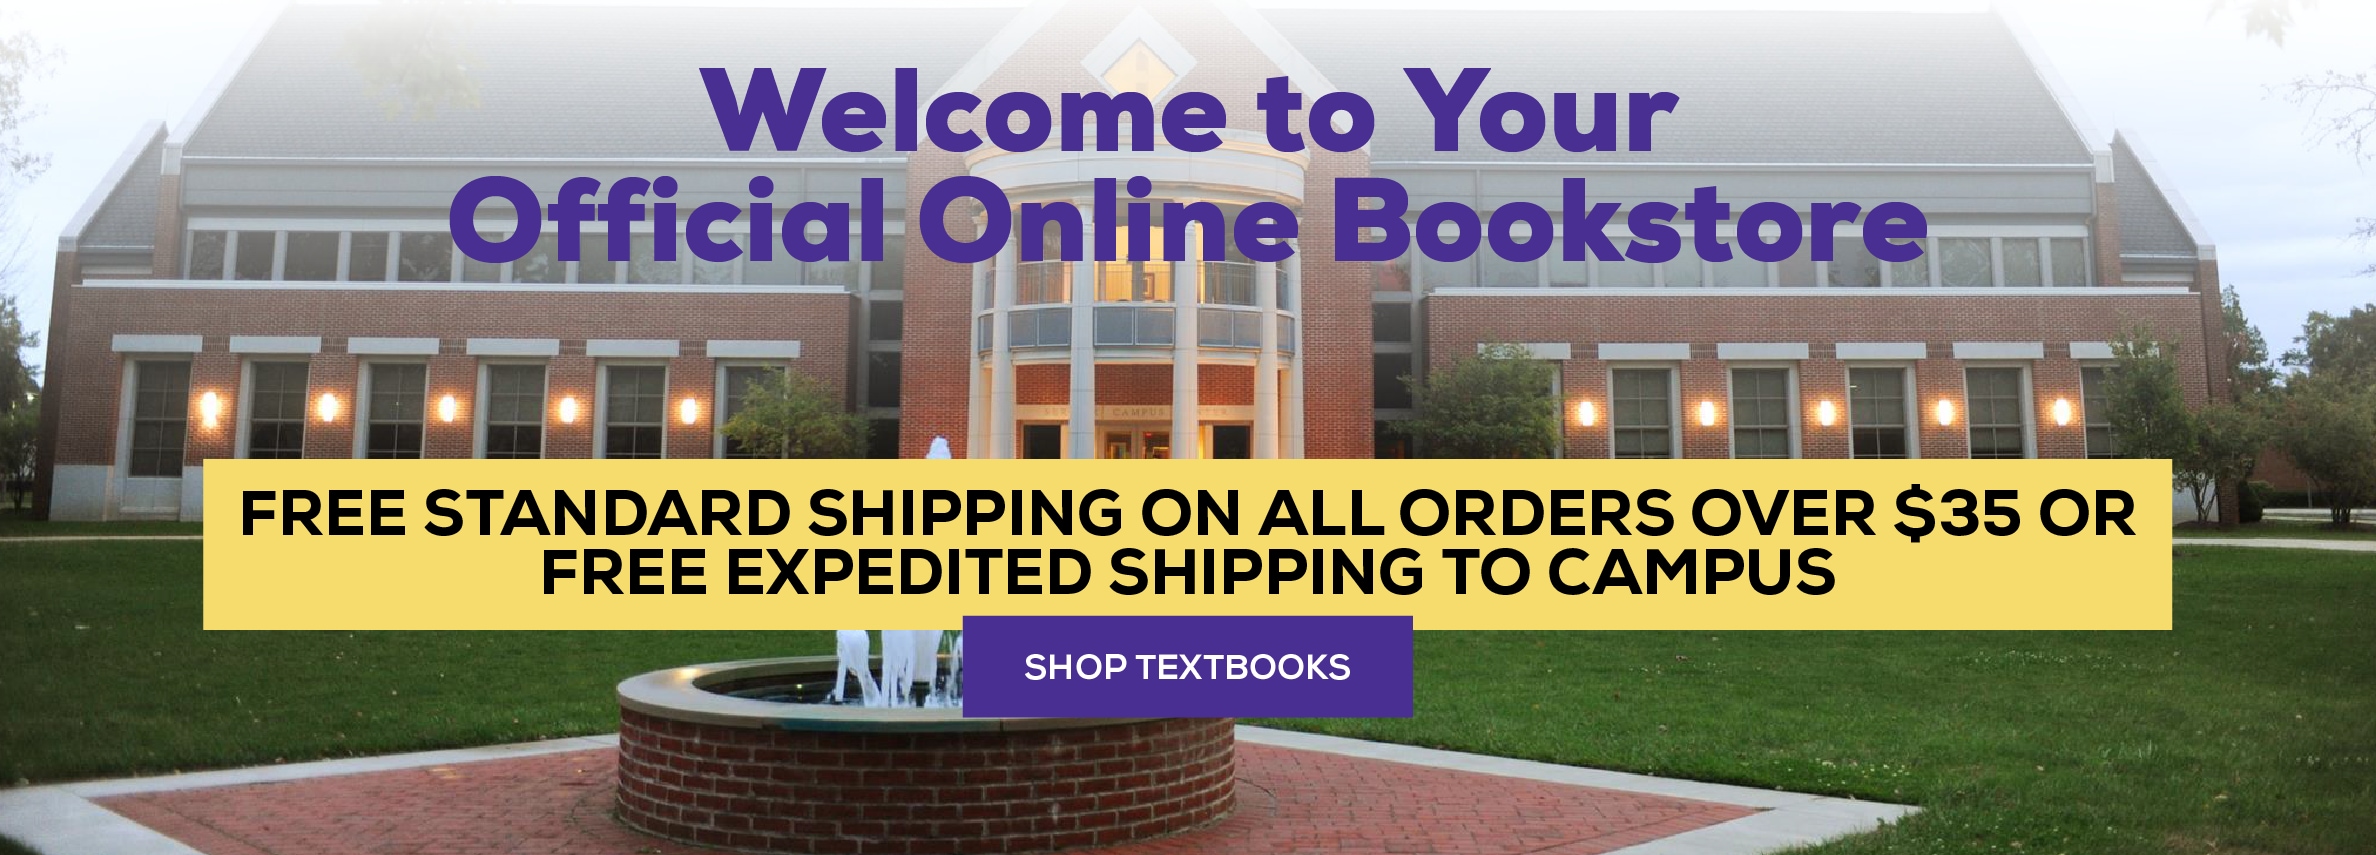 Welcome to your official online bookstore. Free Standard shipping on all orders over $35, or free Expedited shipping to Campus